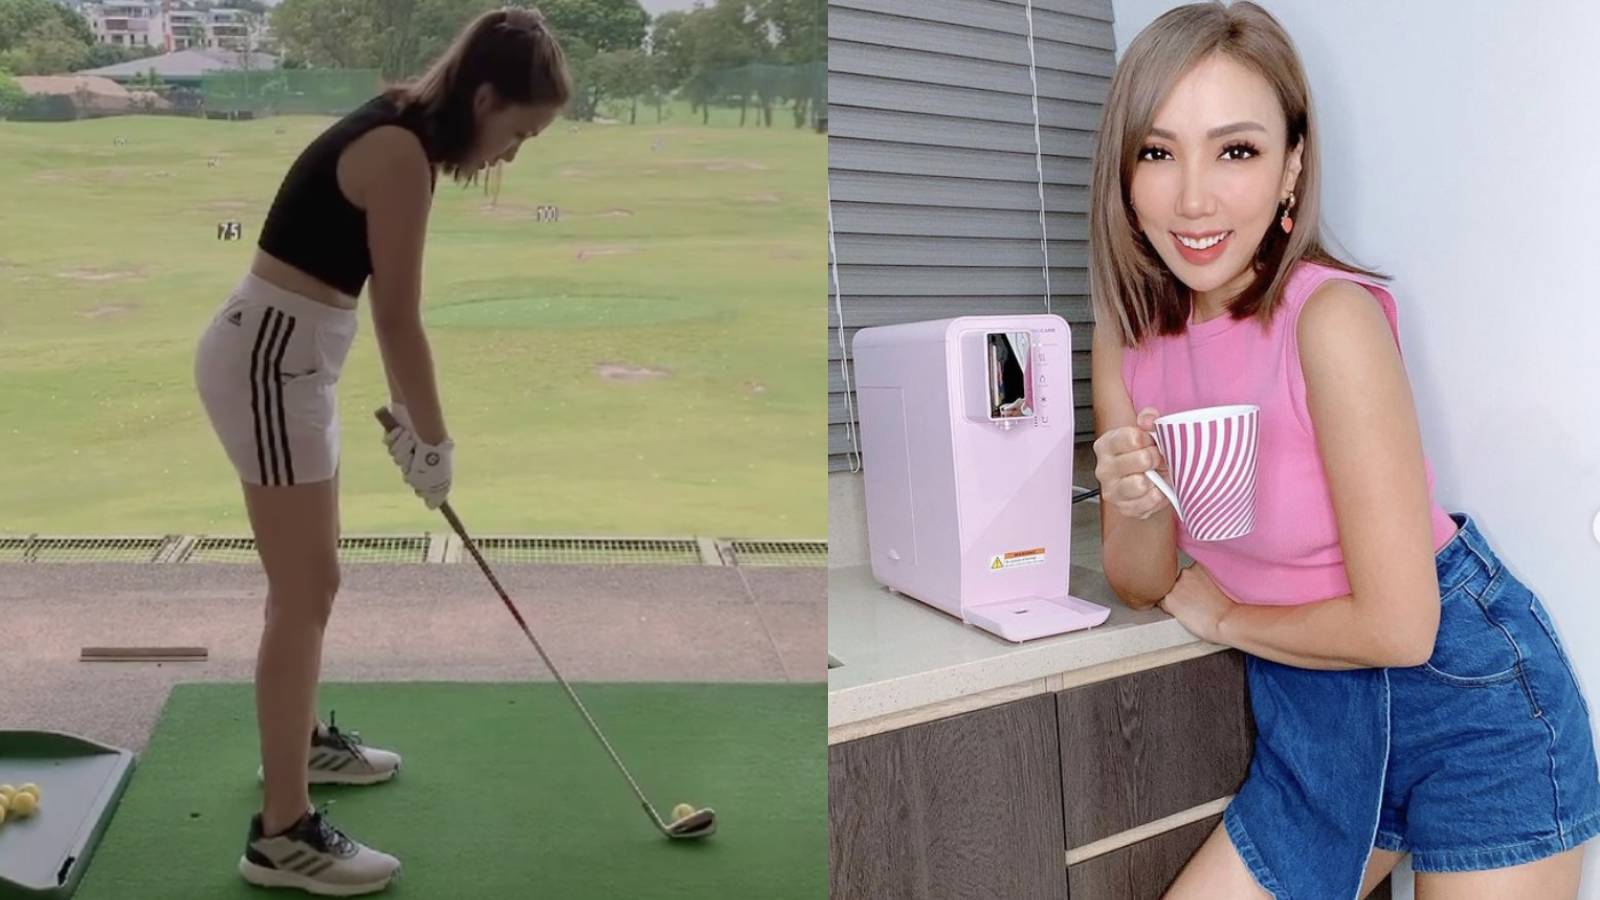 Jean Danker Posts Vid Of Her Golf Swing, But Her Followers Can Only Focus On Her "Butt Wiggle"